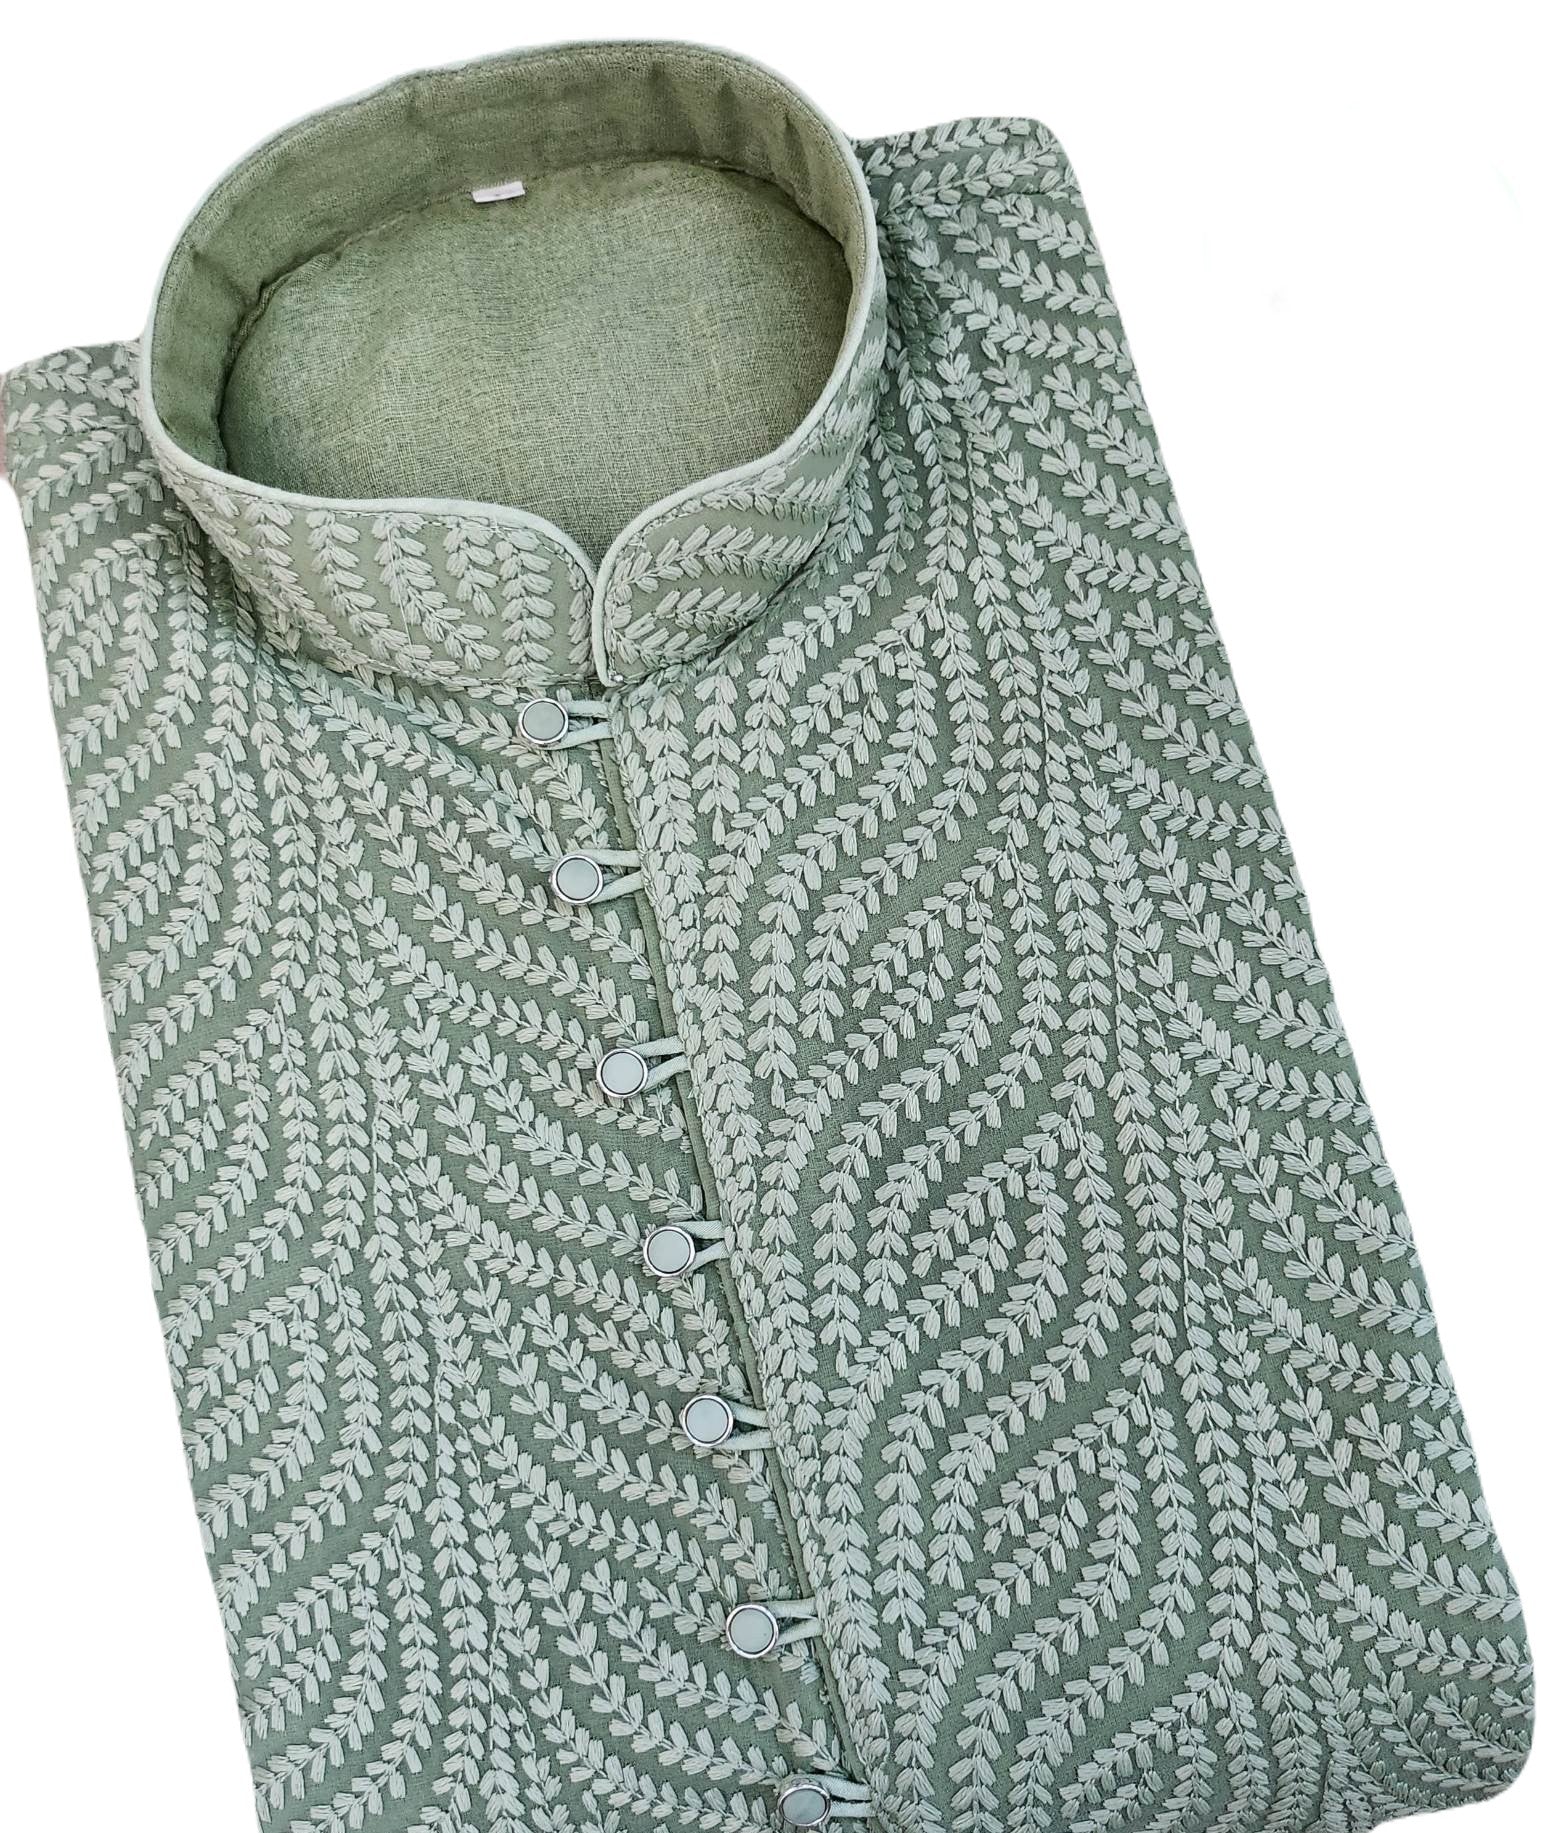 Conspicuous Sage Green Shade Kurta Pajama Set, Georgette with Chikankari Embroidery, Father and Son Matching, KP- 1057